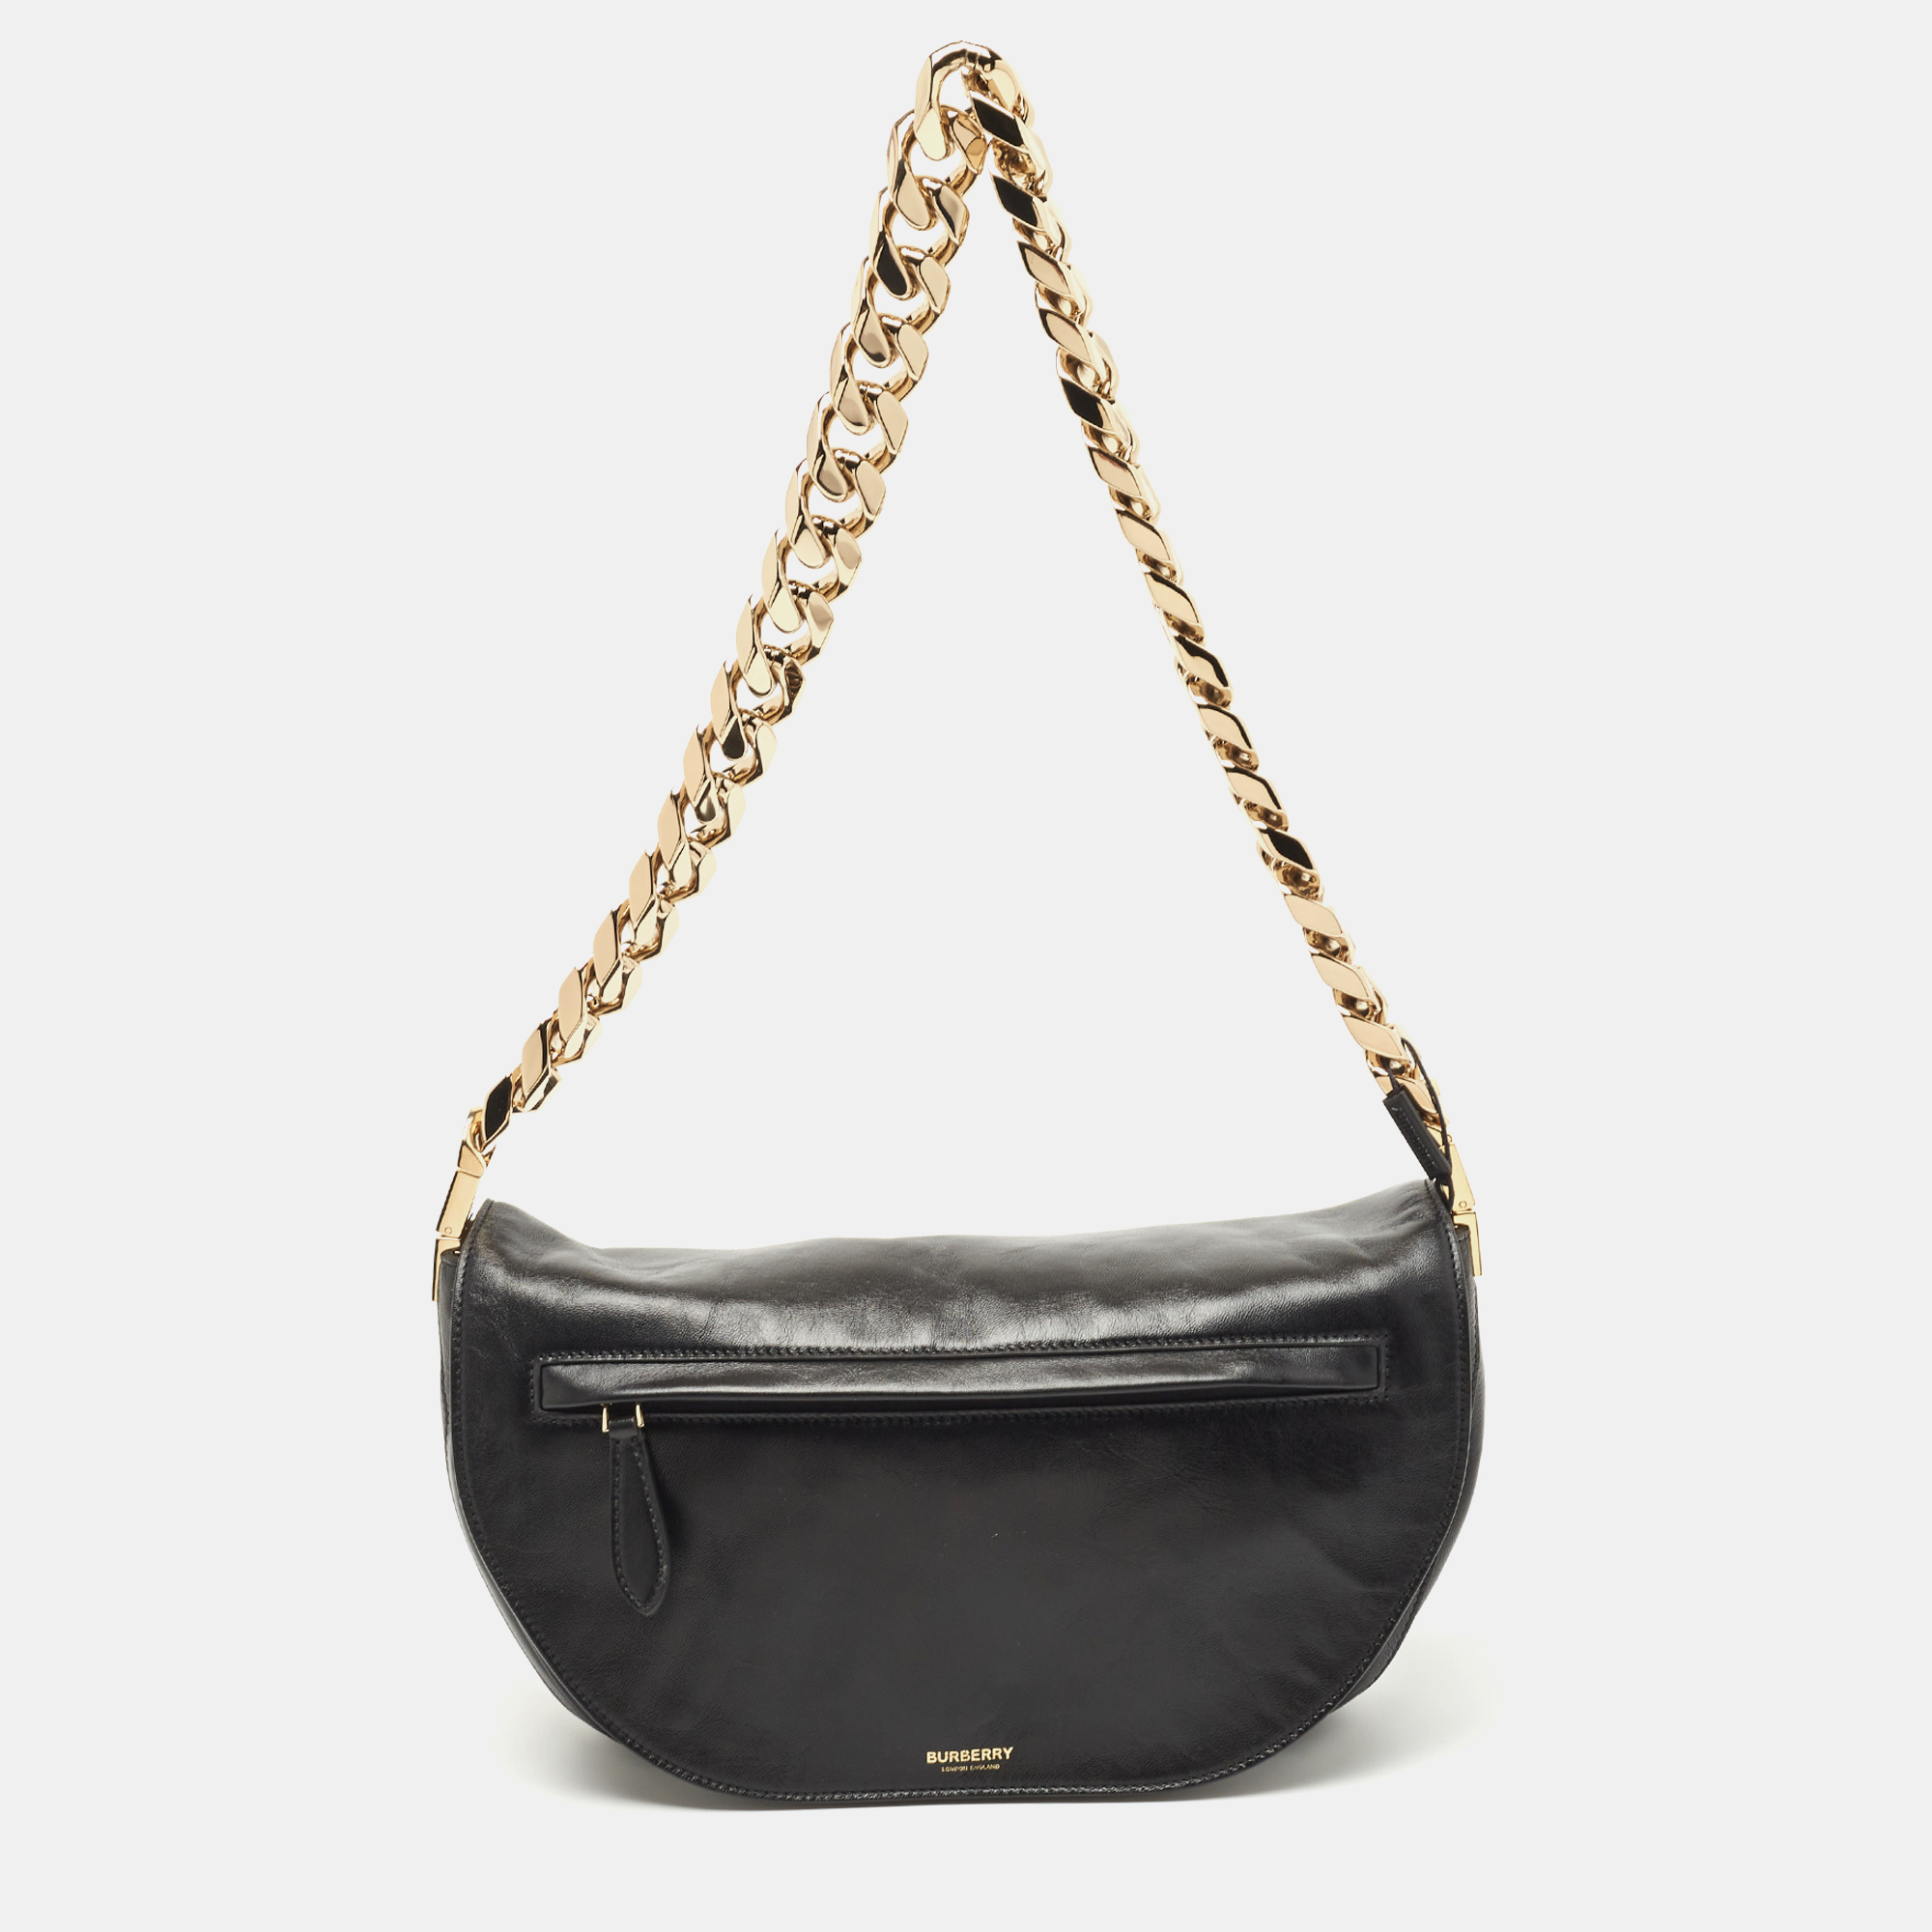 With an architectural shape this Burberry Olympia bag resembles the crescent moon. The brand signature on the front lends to its instant identification and it can be carried conveniently with a shoulder strap. Capturing the essence of feminity it celebrates beauty through its creative design. The top zipper closure of the bag secures its lined interior.